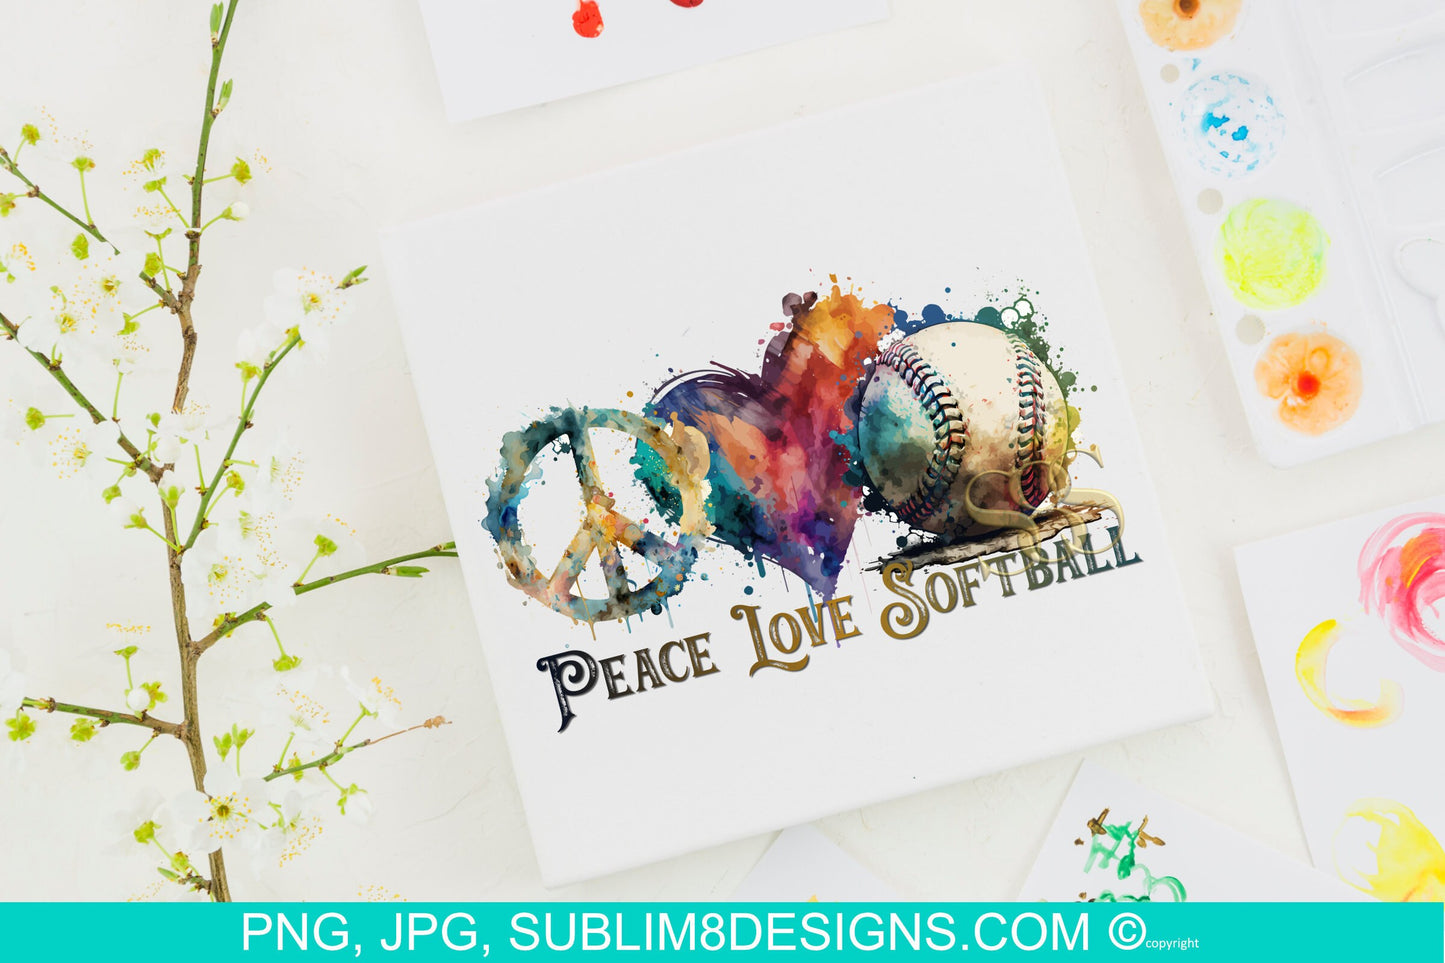 Peace Love and Softball Watercolor Illustration Sublimation Design PNG and JPEG ONLY